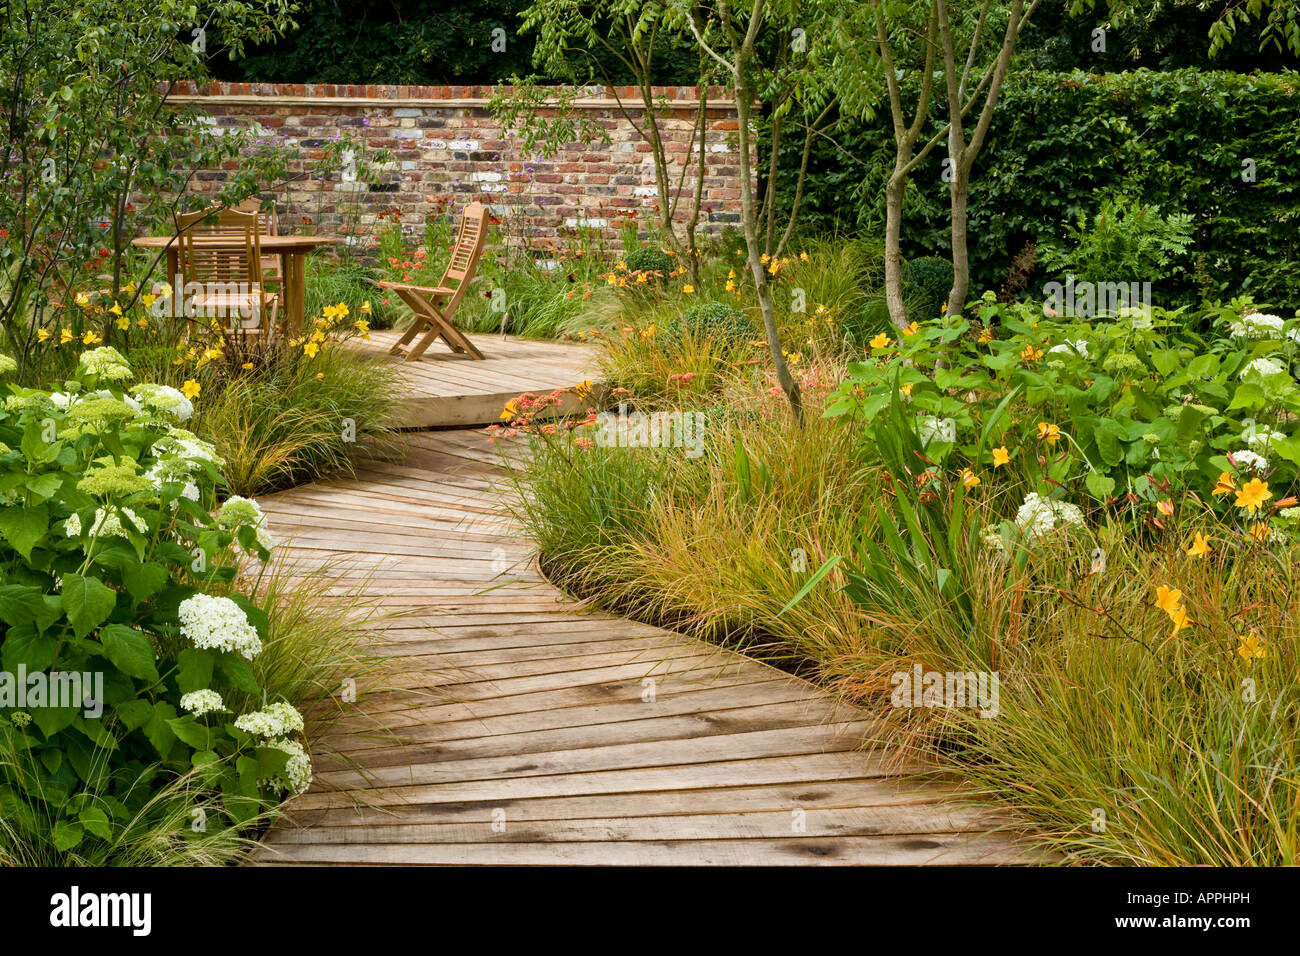 Boardwalk in garden to decking sitting area with table and chairs. Plants include Hydrangea Hemerocallis evergreen grass Stipa a Stock Photo